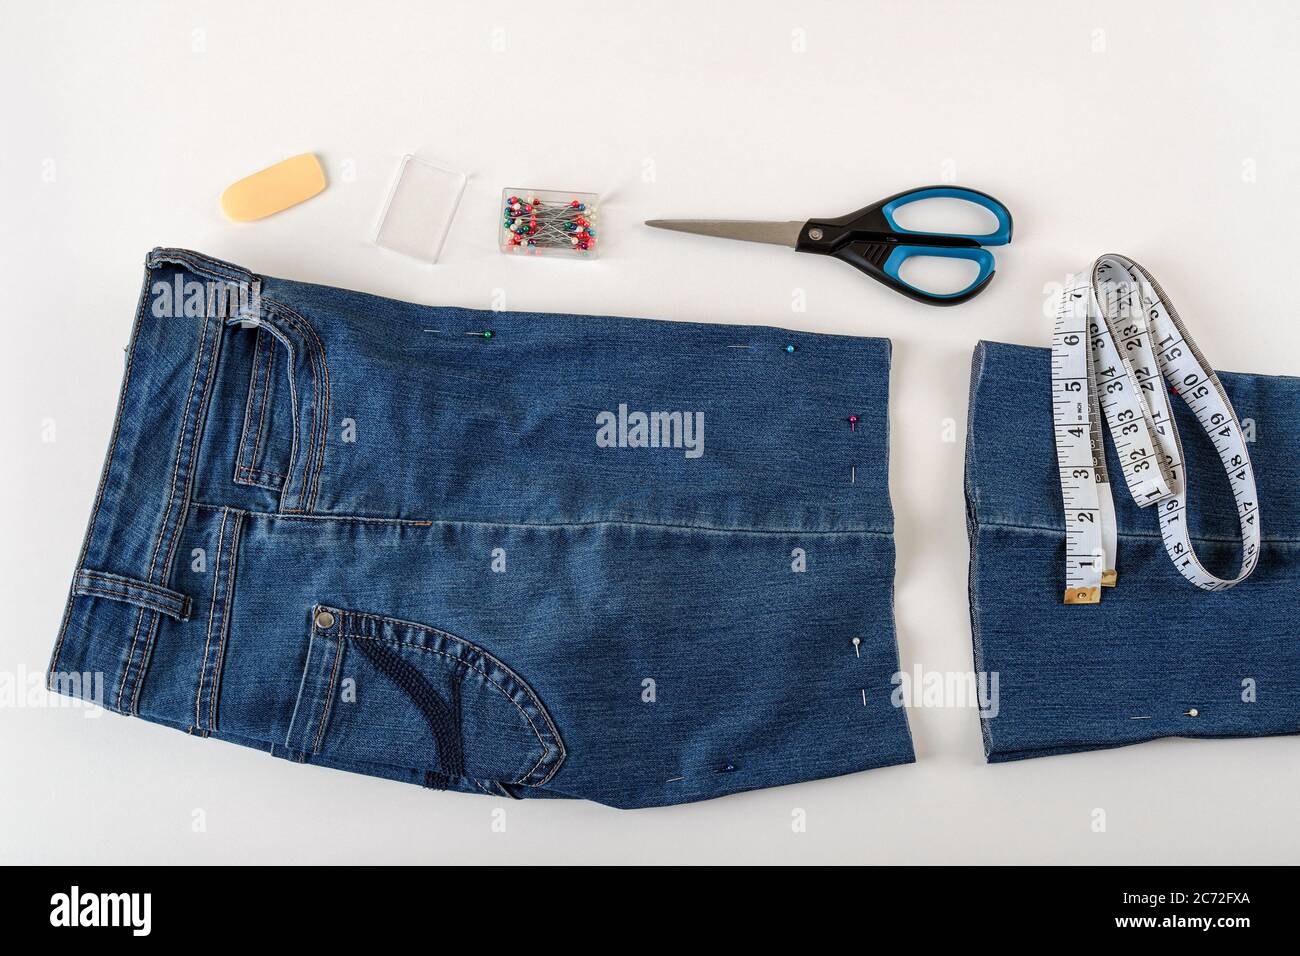 https://c8.alamy.com/comp/2C72FXA/just-cutted-blue-denip-shorts-measuring-tape-scissors-and-sewing-pin-on-a-white-table-shorten-the-jeans-with-scissors-and-sewing-pin-diy-2C72FXA.jpg